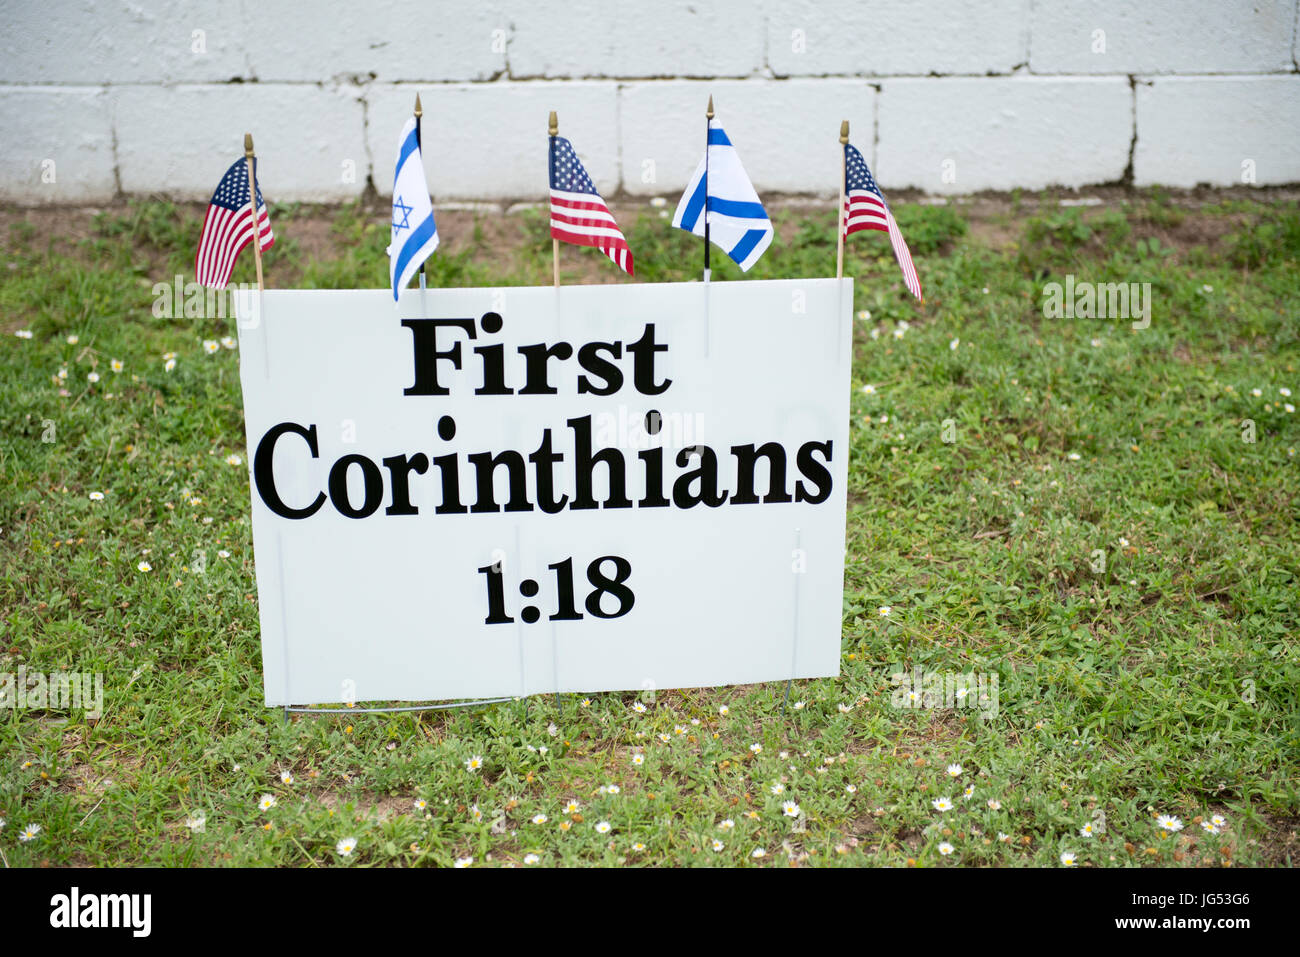 Pensacola, Florida, USA. 27th June, 2017. Bible verse displayed on sign with American and Jewish flag nearby the Save the Bayview Cross Rally.   Sandy Stock Photo